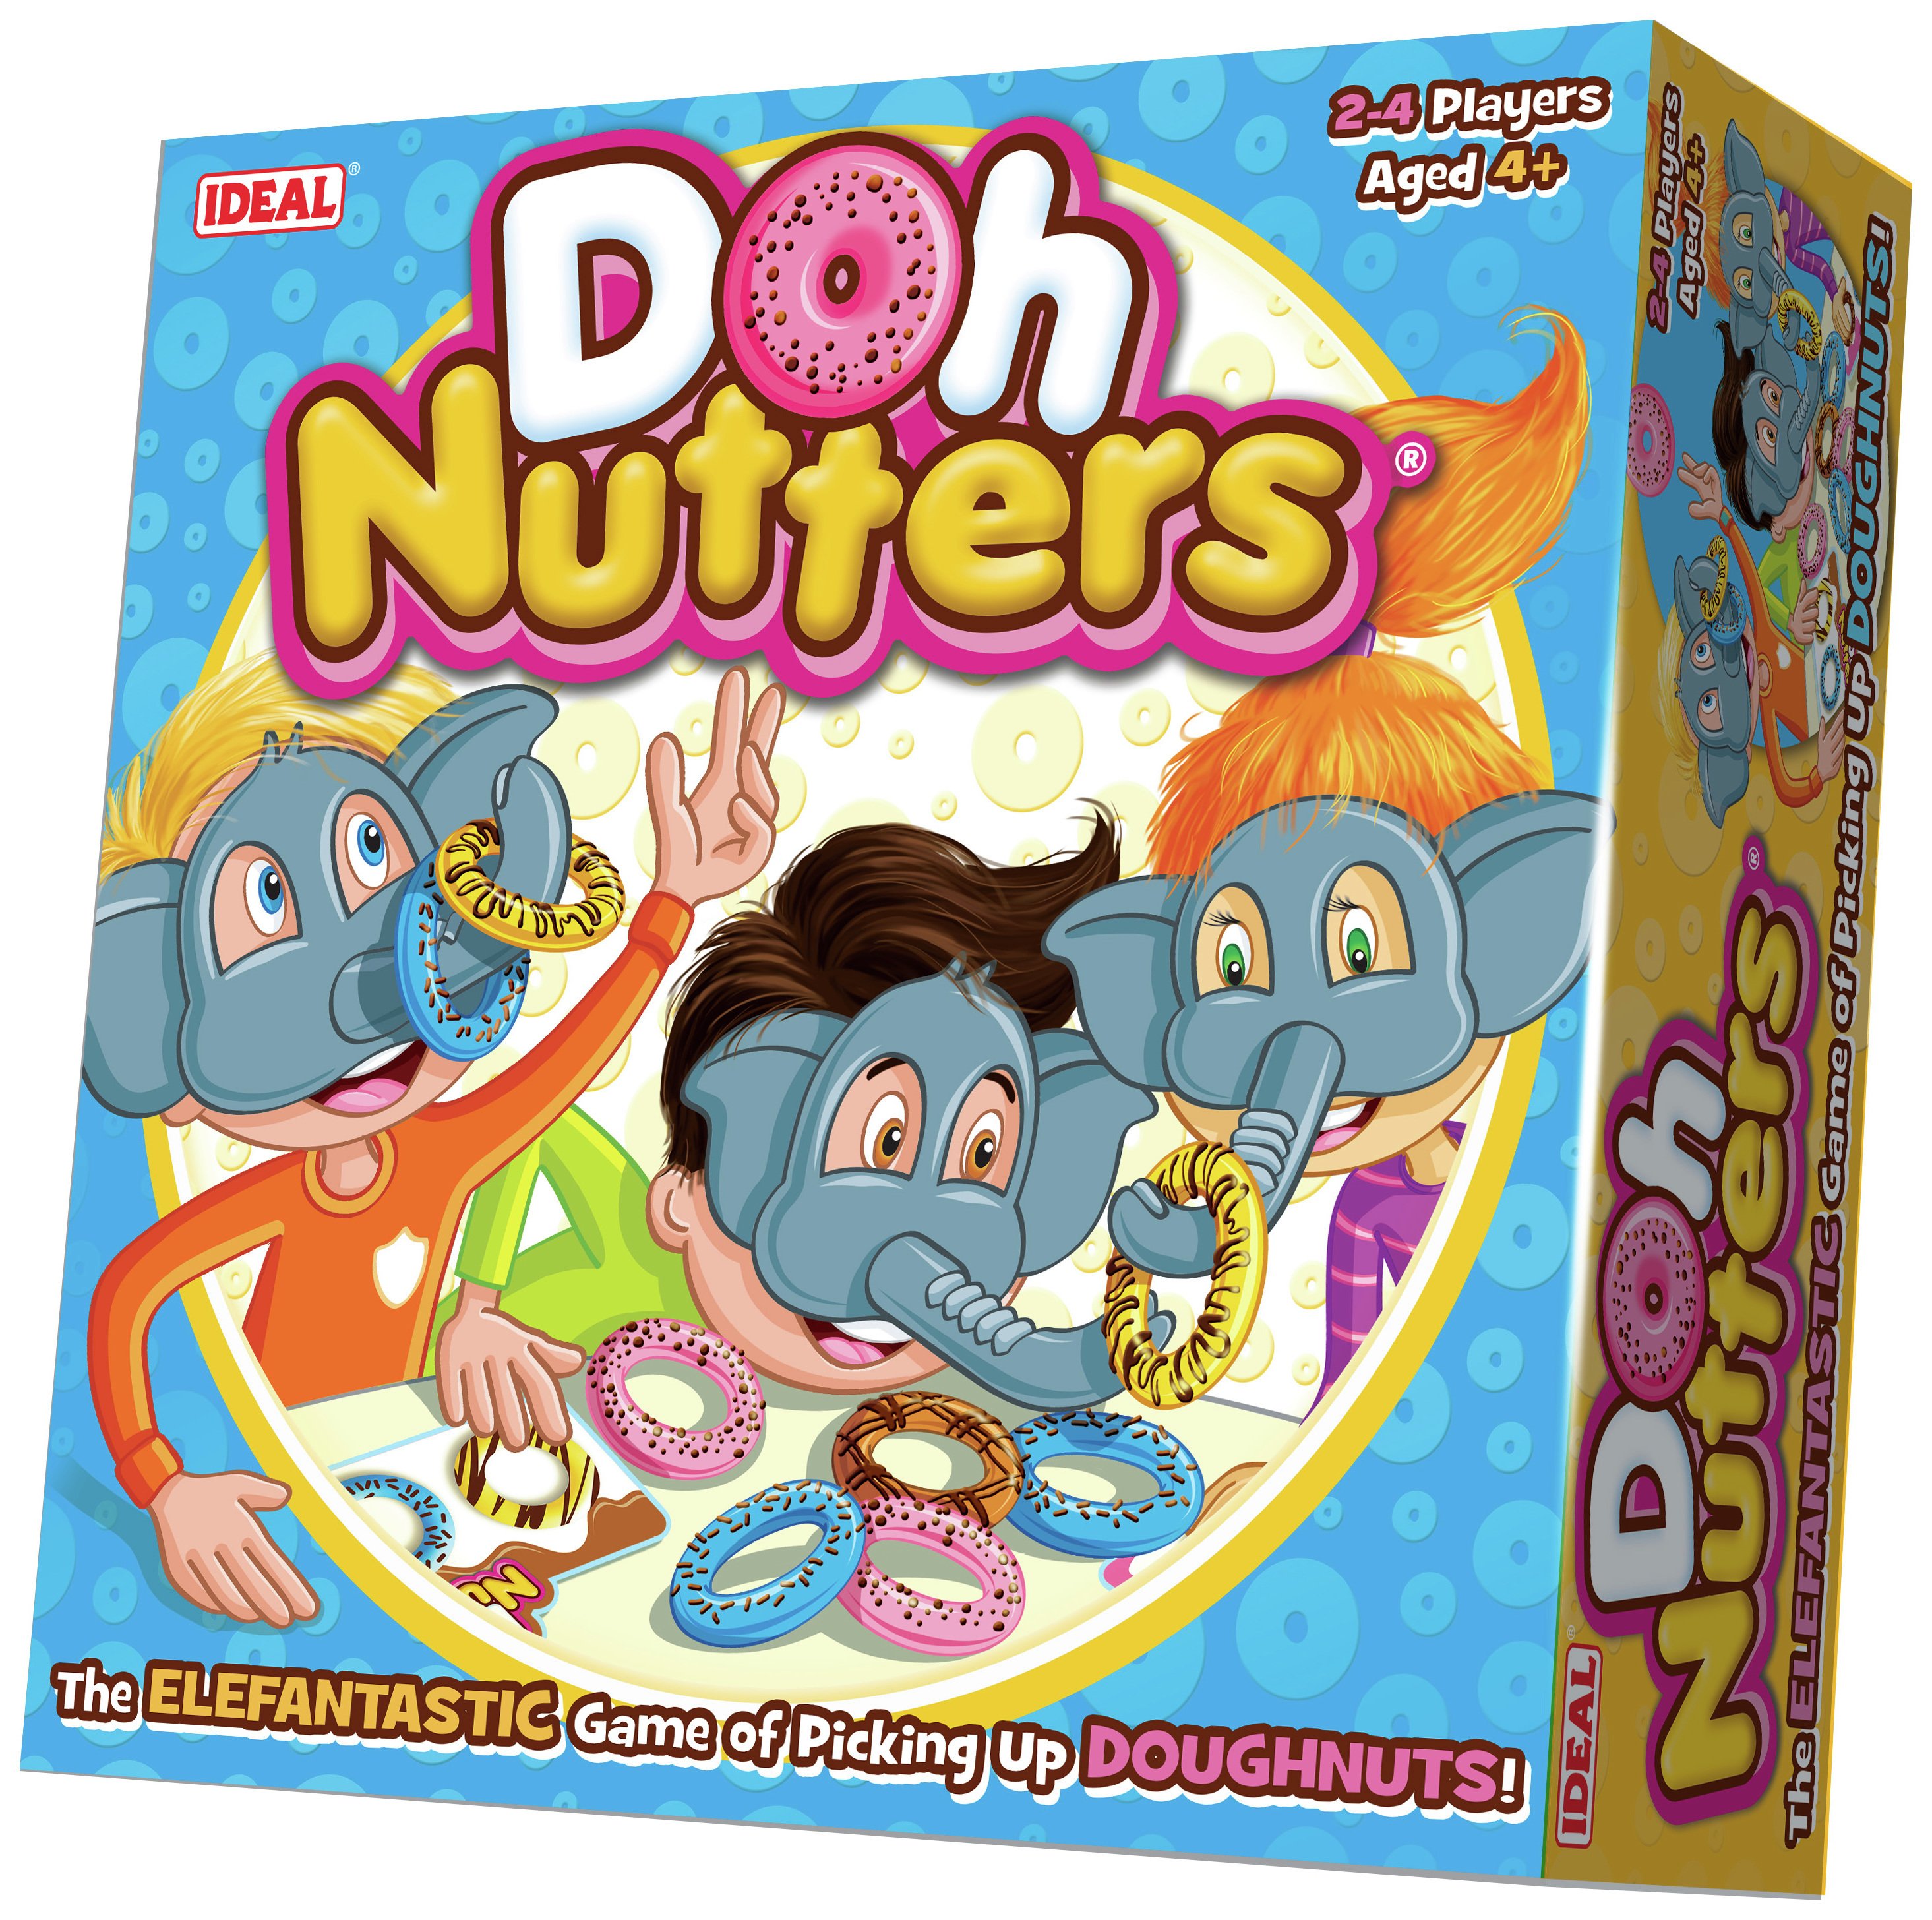 Doh Nutters Game review